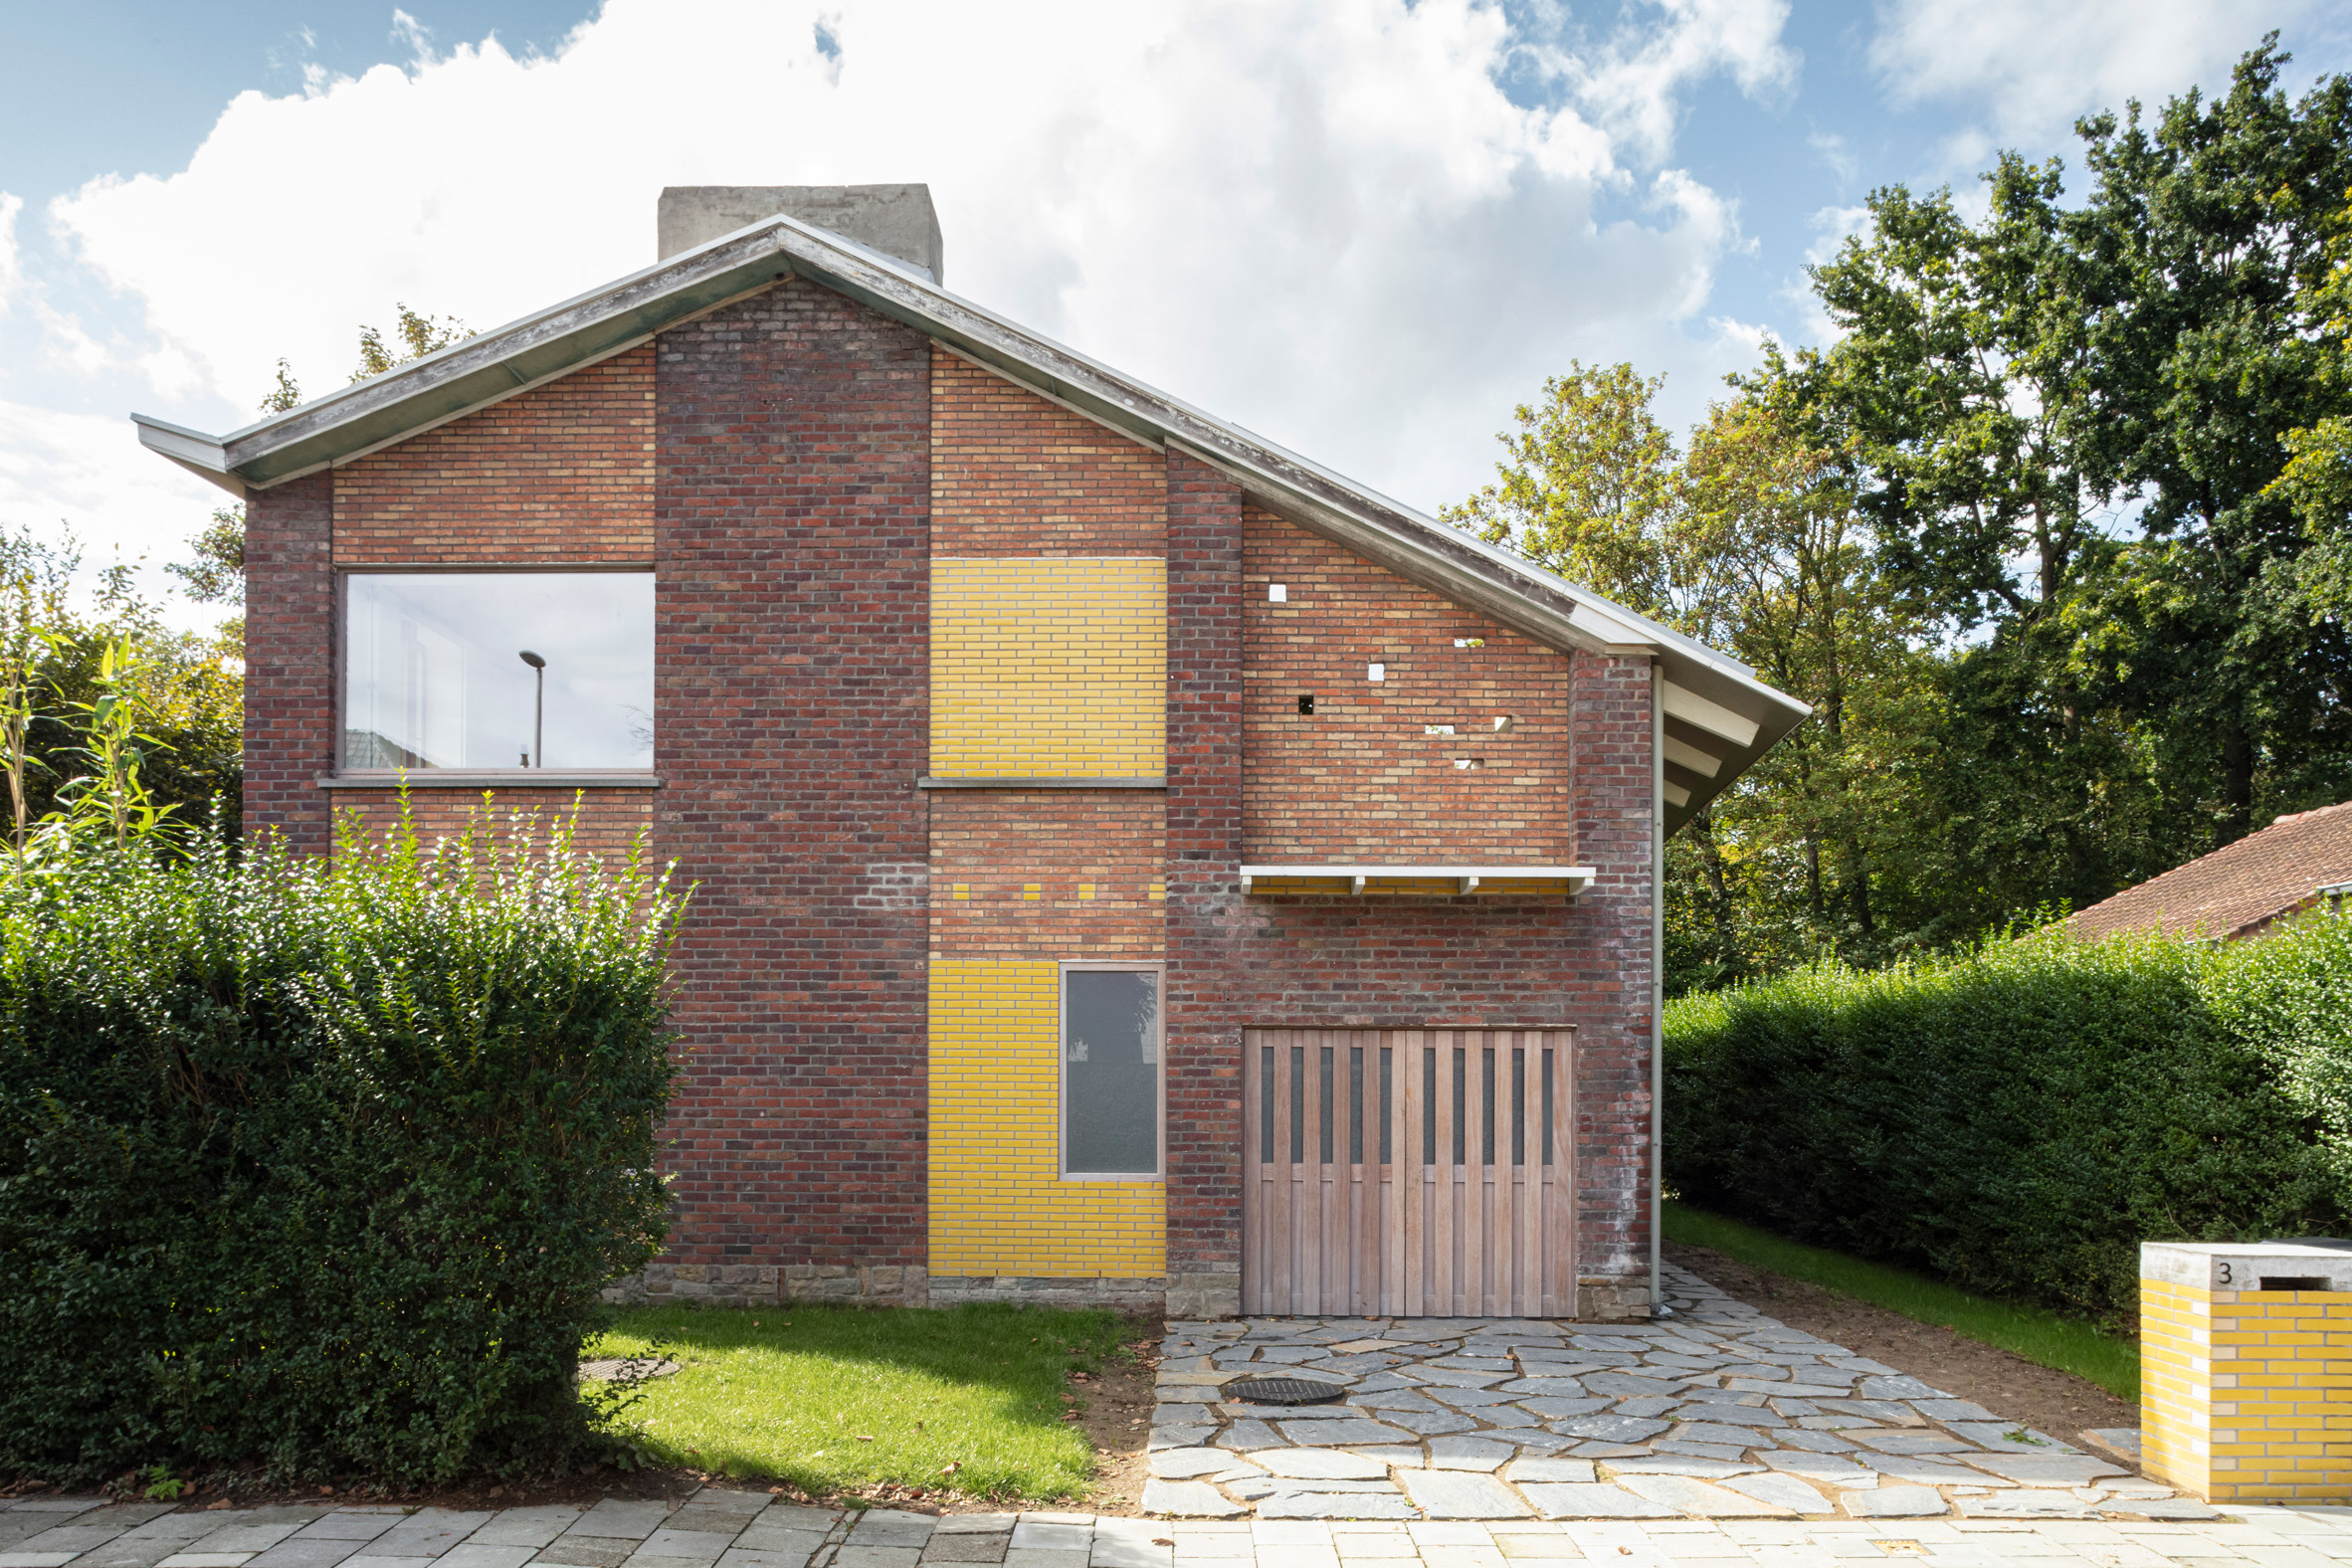 Exterior of SL House by Ae-Architecten